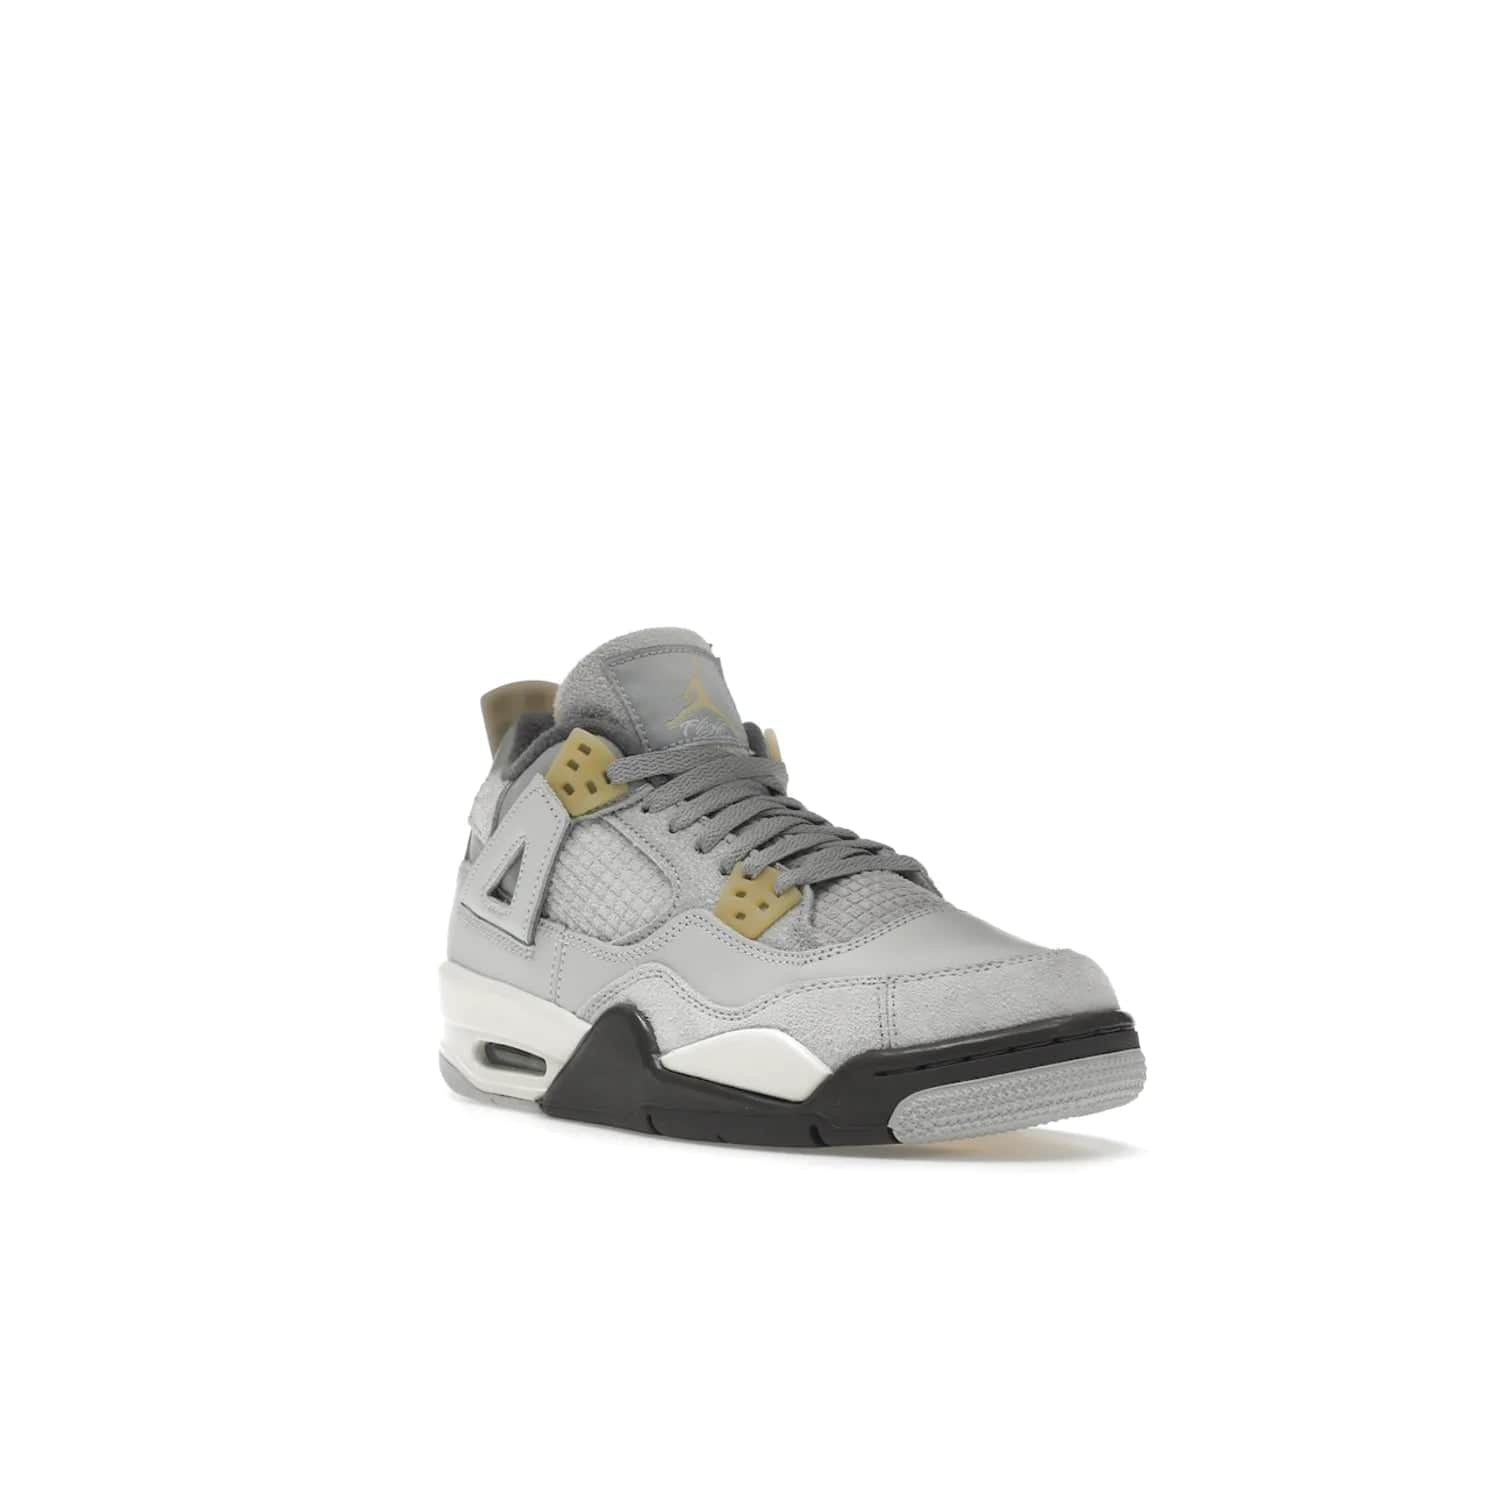 Jordan 4 Retro SE Craft Photon Dust (GS) - Image 6 - Only at www.BallersClubKickz.com - Shop the Jordan 4 Retro SE Craft Photon Dust (GS), the ultimate mix of style and comfort. With photonic dust, pale vanilla, off-white, grey fog, flat pewter and sail colorway, foam midsole, and rubber outsole, don't miss this special edition Jordan 4 releasing Feb 11, 2023.